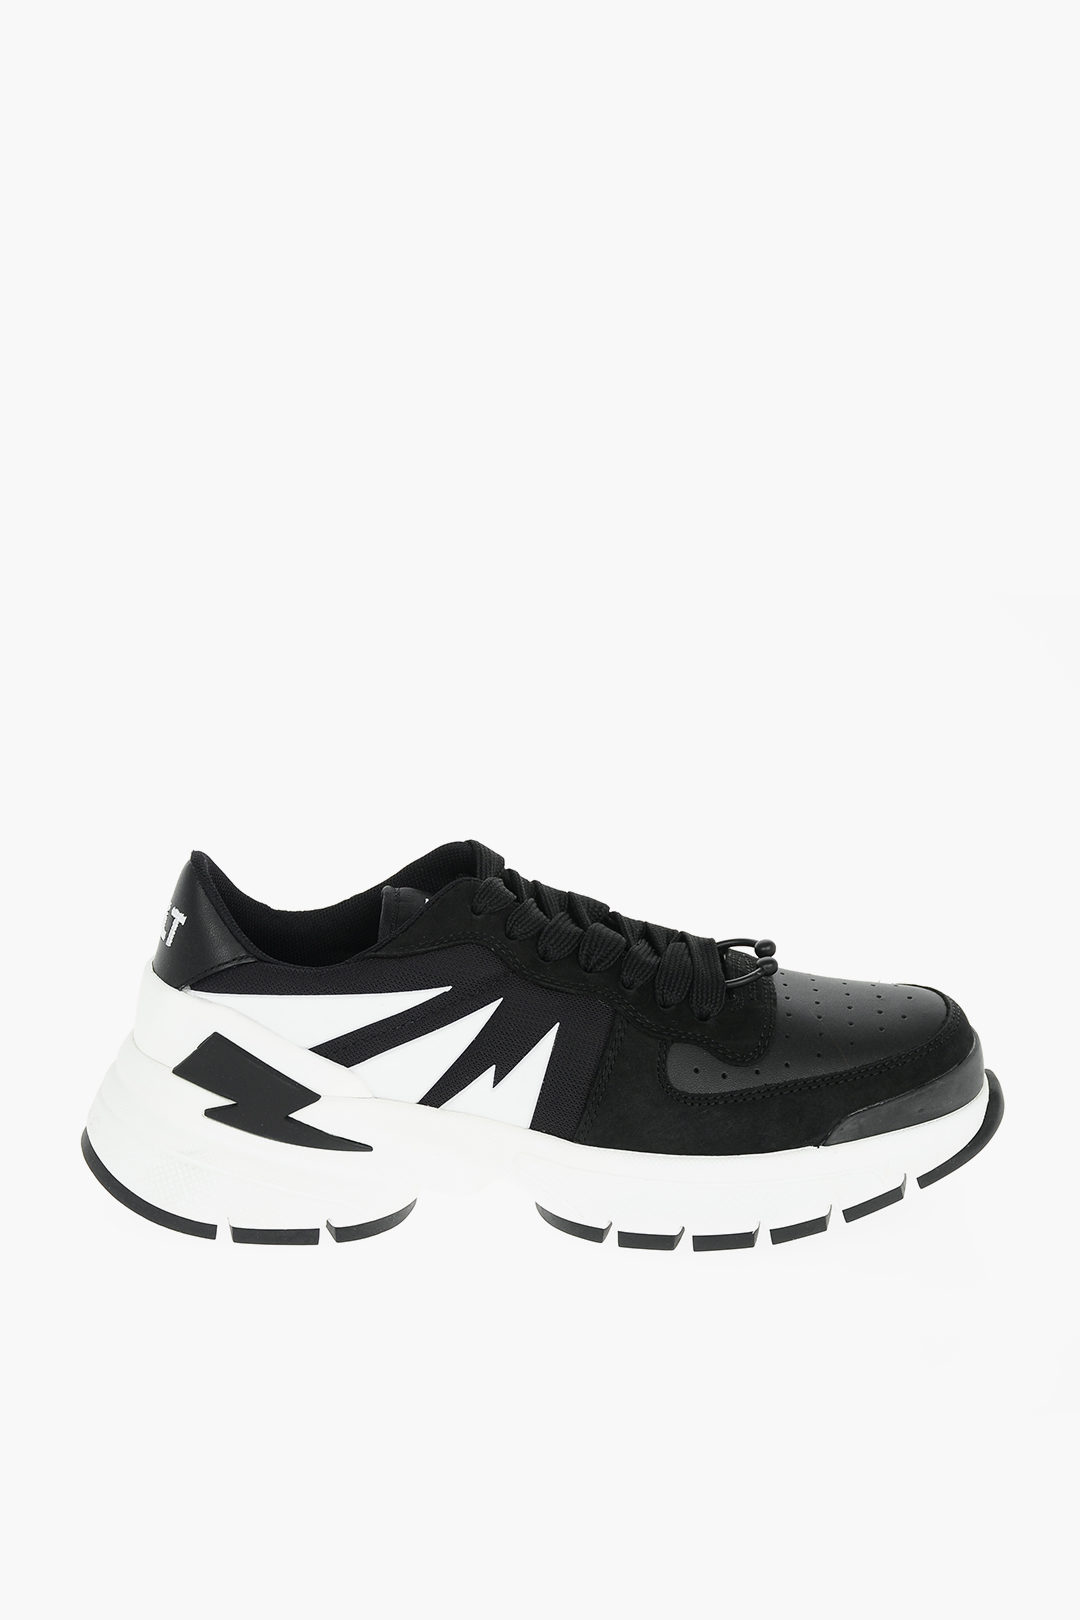 Neil Barrett Sneakers TIGER BOLT with Suede Leather Details men ...